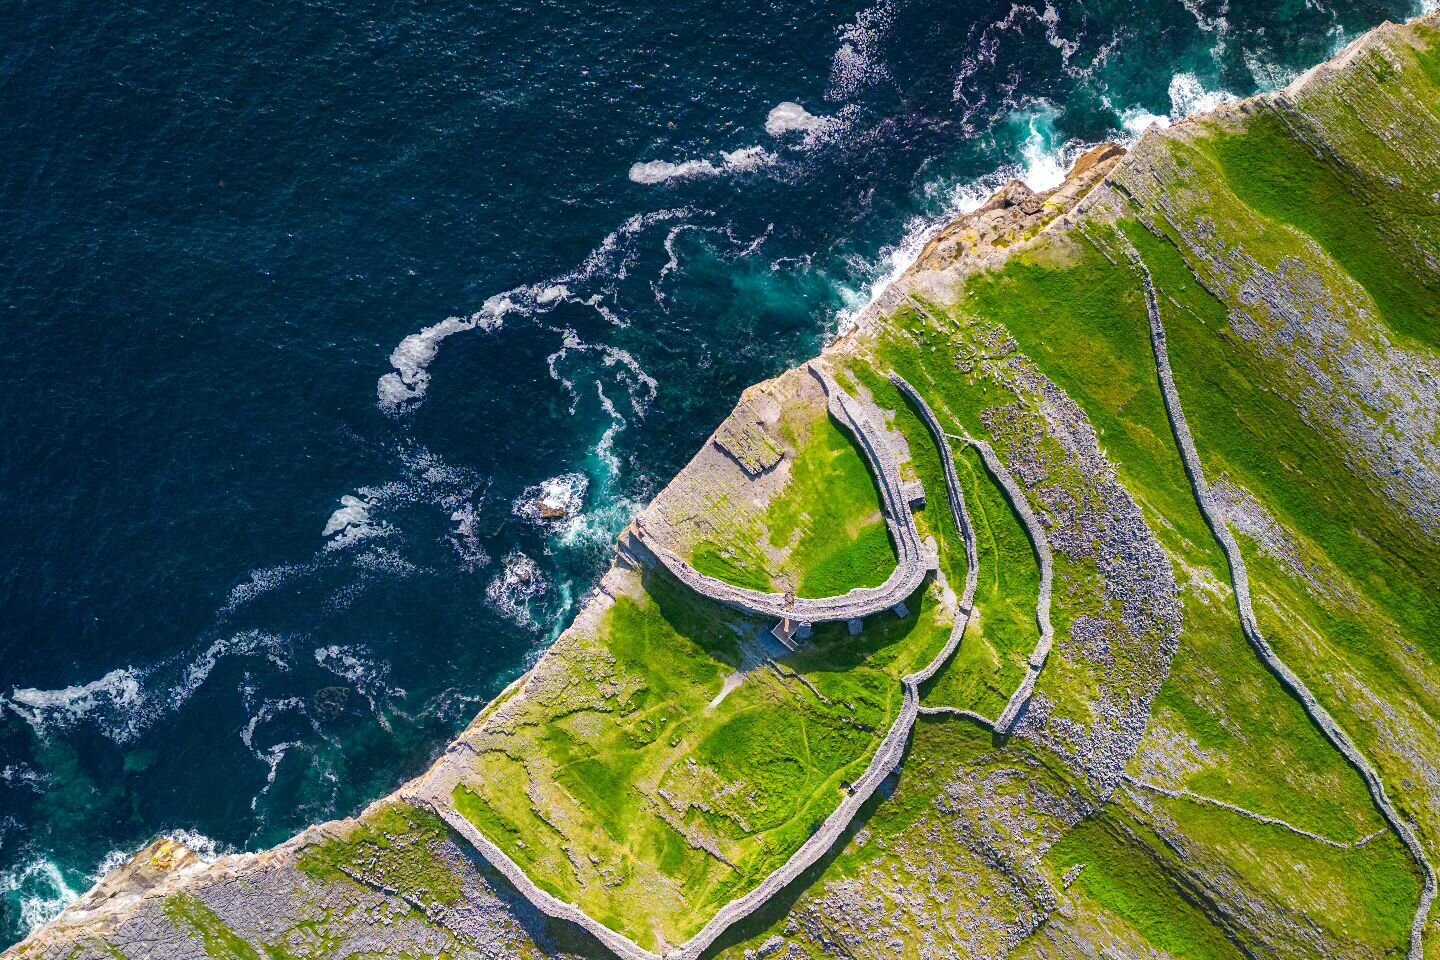 D&uacute;n Aonghasa, what a place, placed on the edge of a 150m cliff on an island on the edge of the Atlantic this fort is one of the most amazing places I've been. An amazing place to visit but also hard to bring across in a picture or in person as